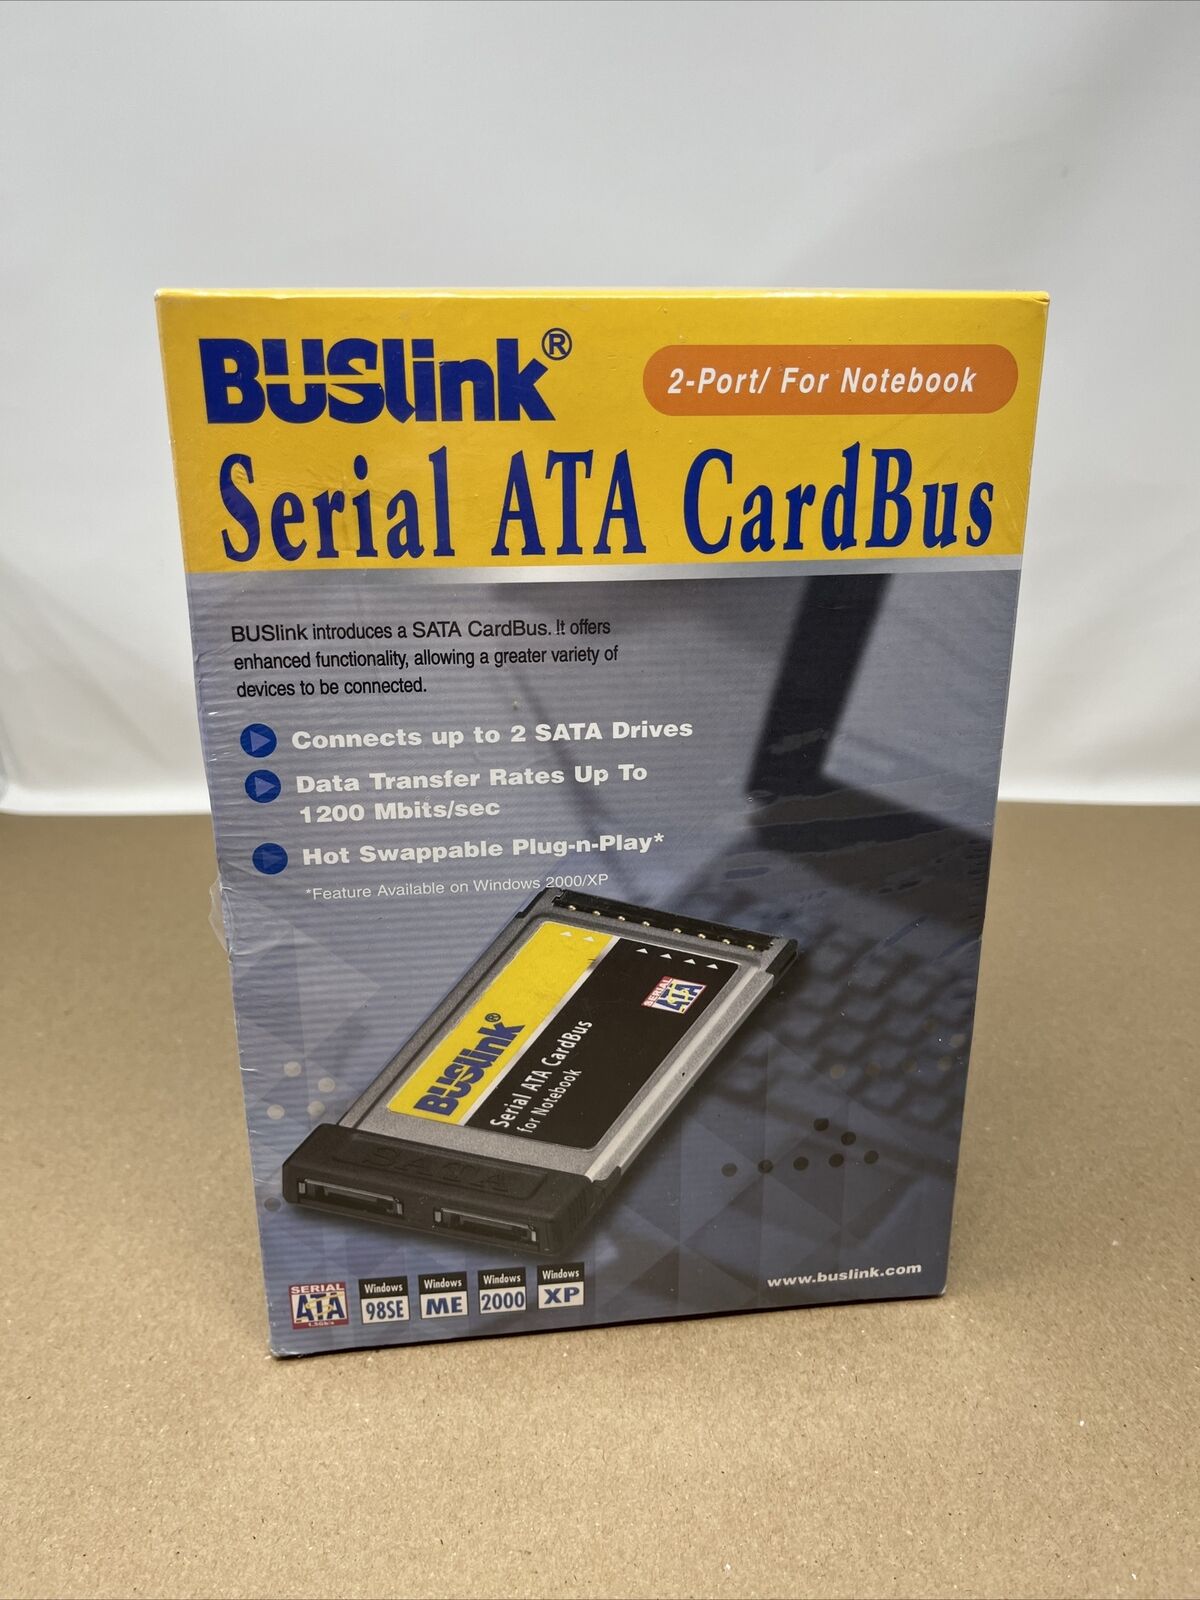 Buslink Serail Ata Cardbus 2-port/for Notebook Connects Up To 2 Sata Drives